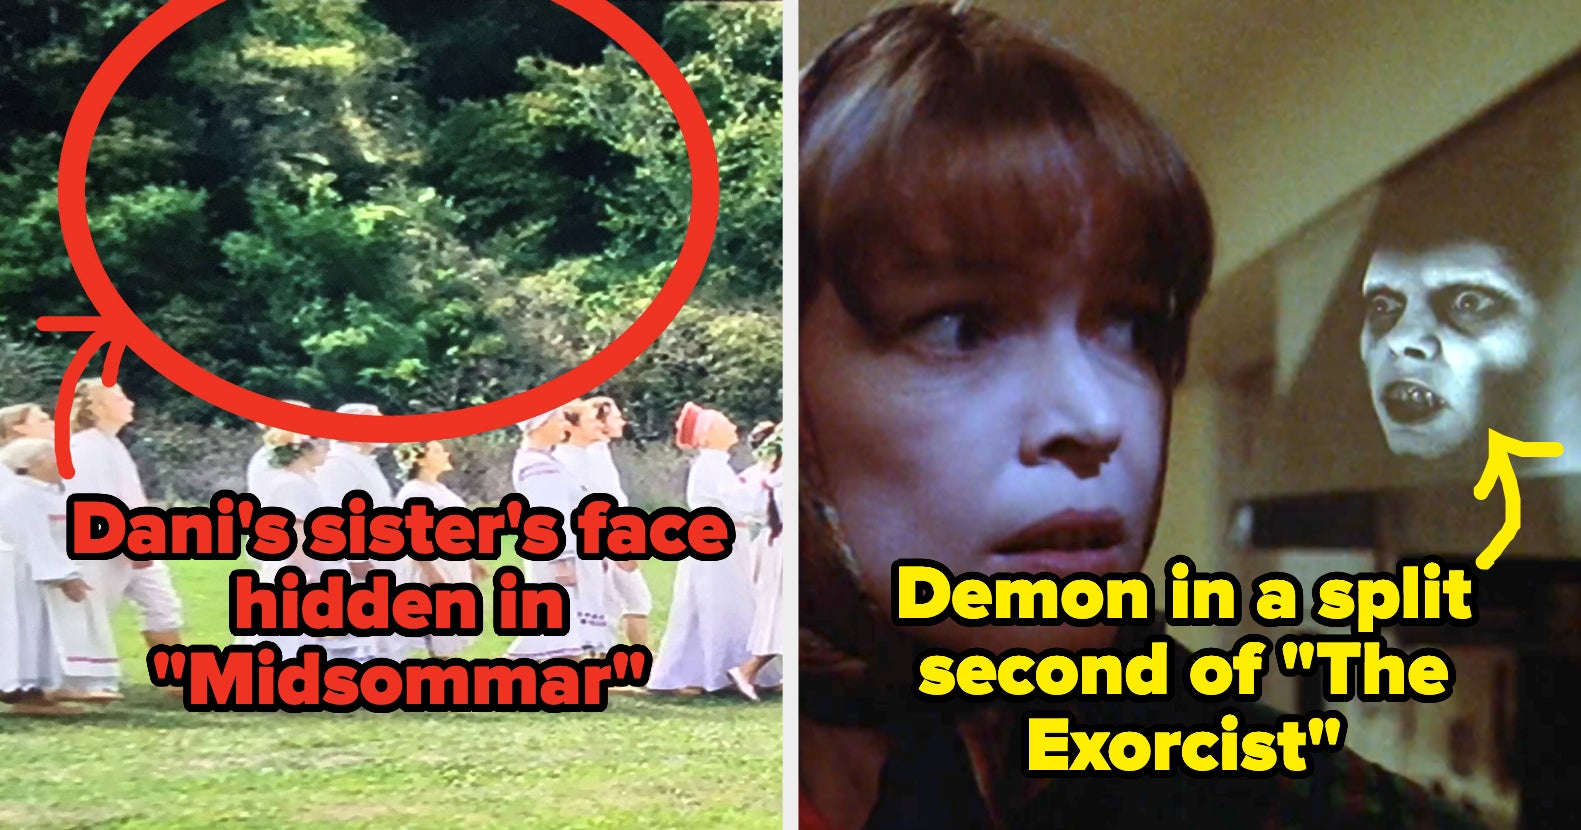 Creepy Background Ghosts, Hidden Biblical References, And 25 Other Terrifying Horror Movie Details That Keep Me Up At Night